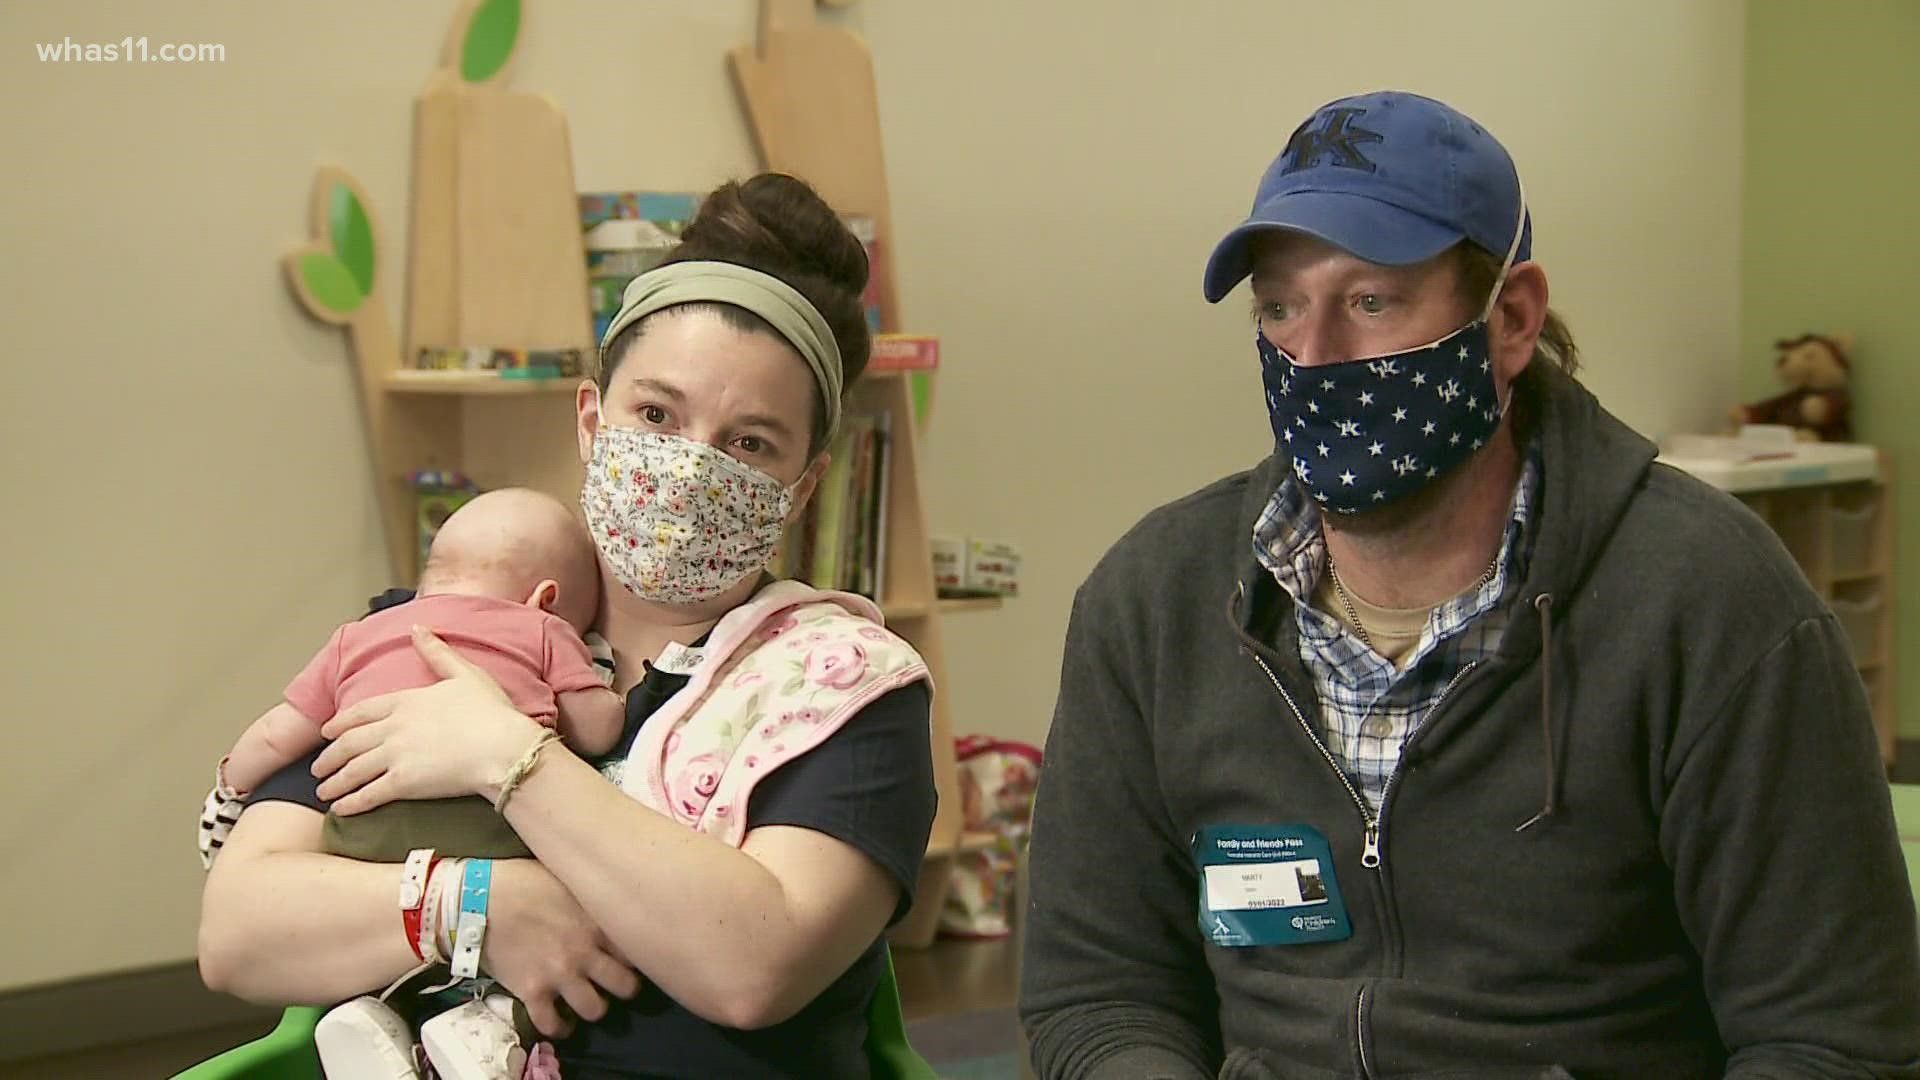 While Marty and Shannon stayed in Louisville with their twins in the NICU, they faced another hardship when a tornado destroyed their home